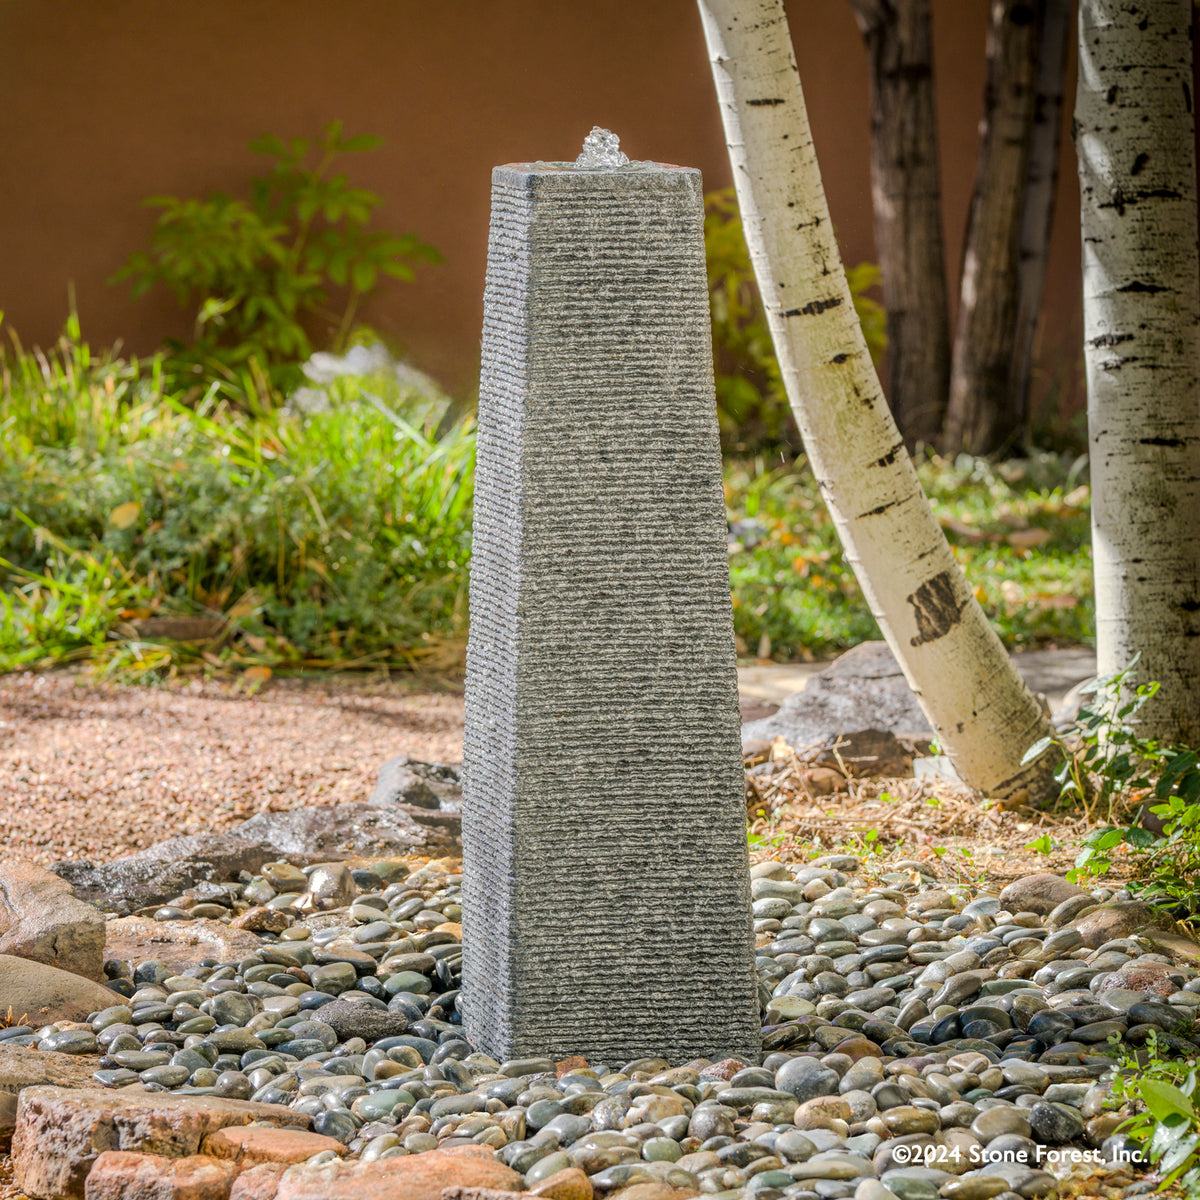 The Obelisk Fountain is a stone pillar, typically having a square cross-section and a pyramidal top. Set it up as a monument or landmark. Carved from Black & White Granite. image 1 of 2